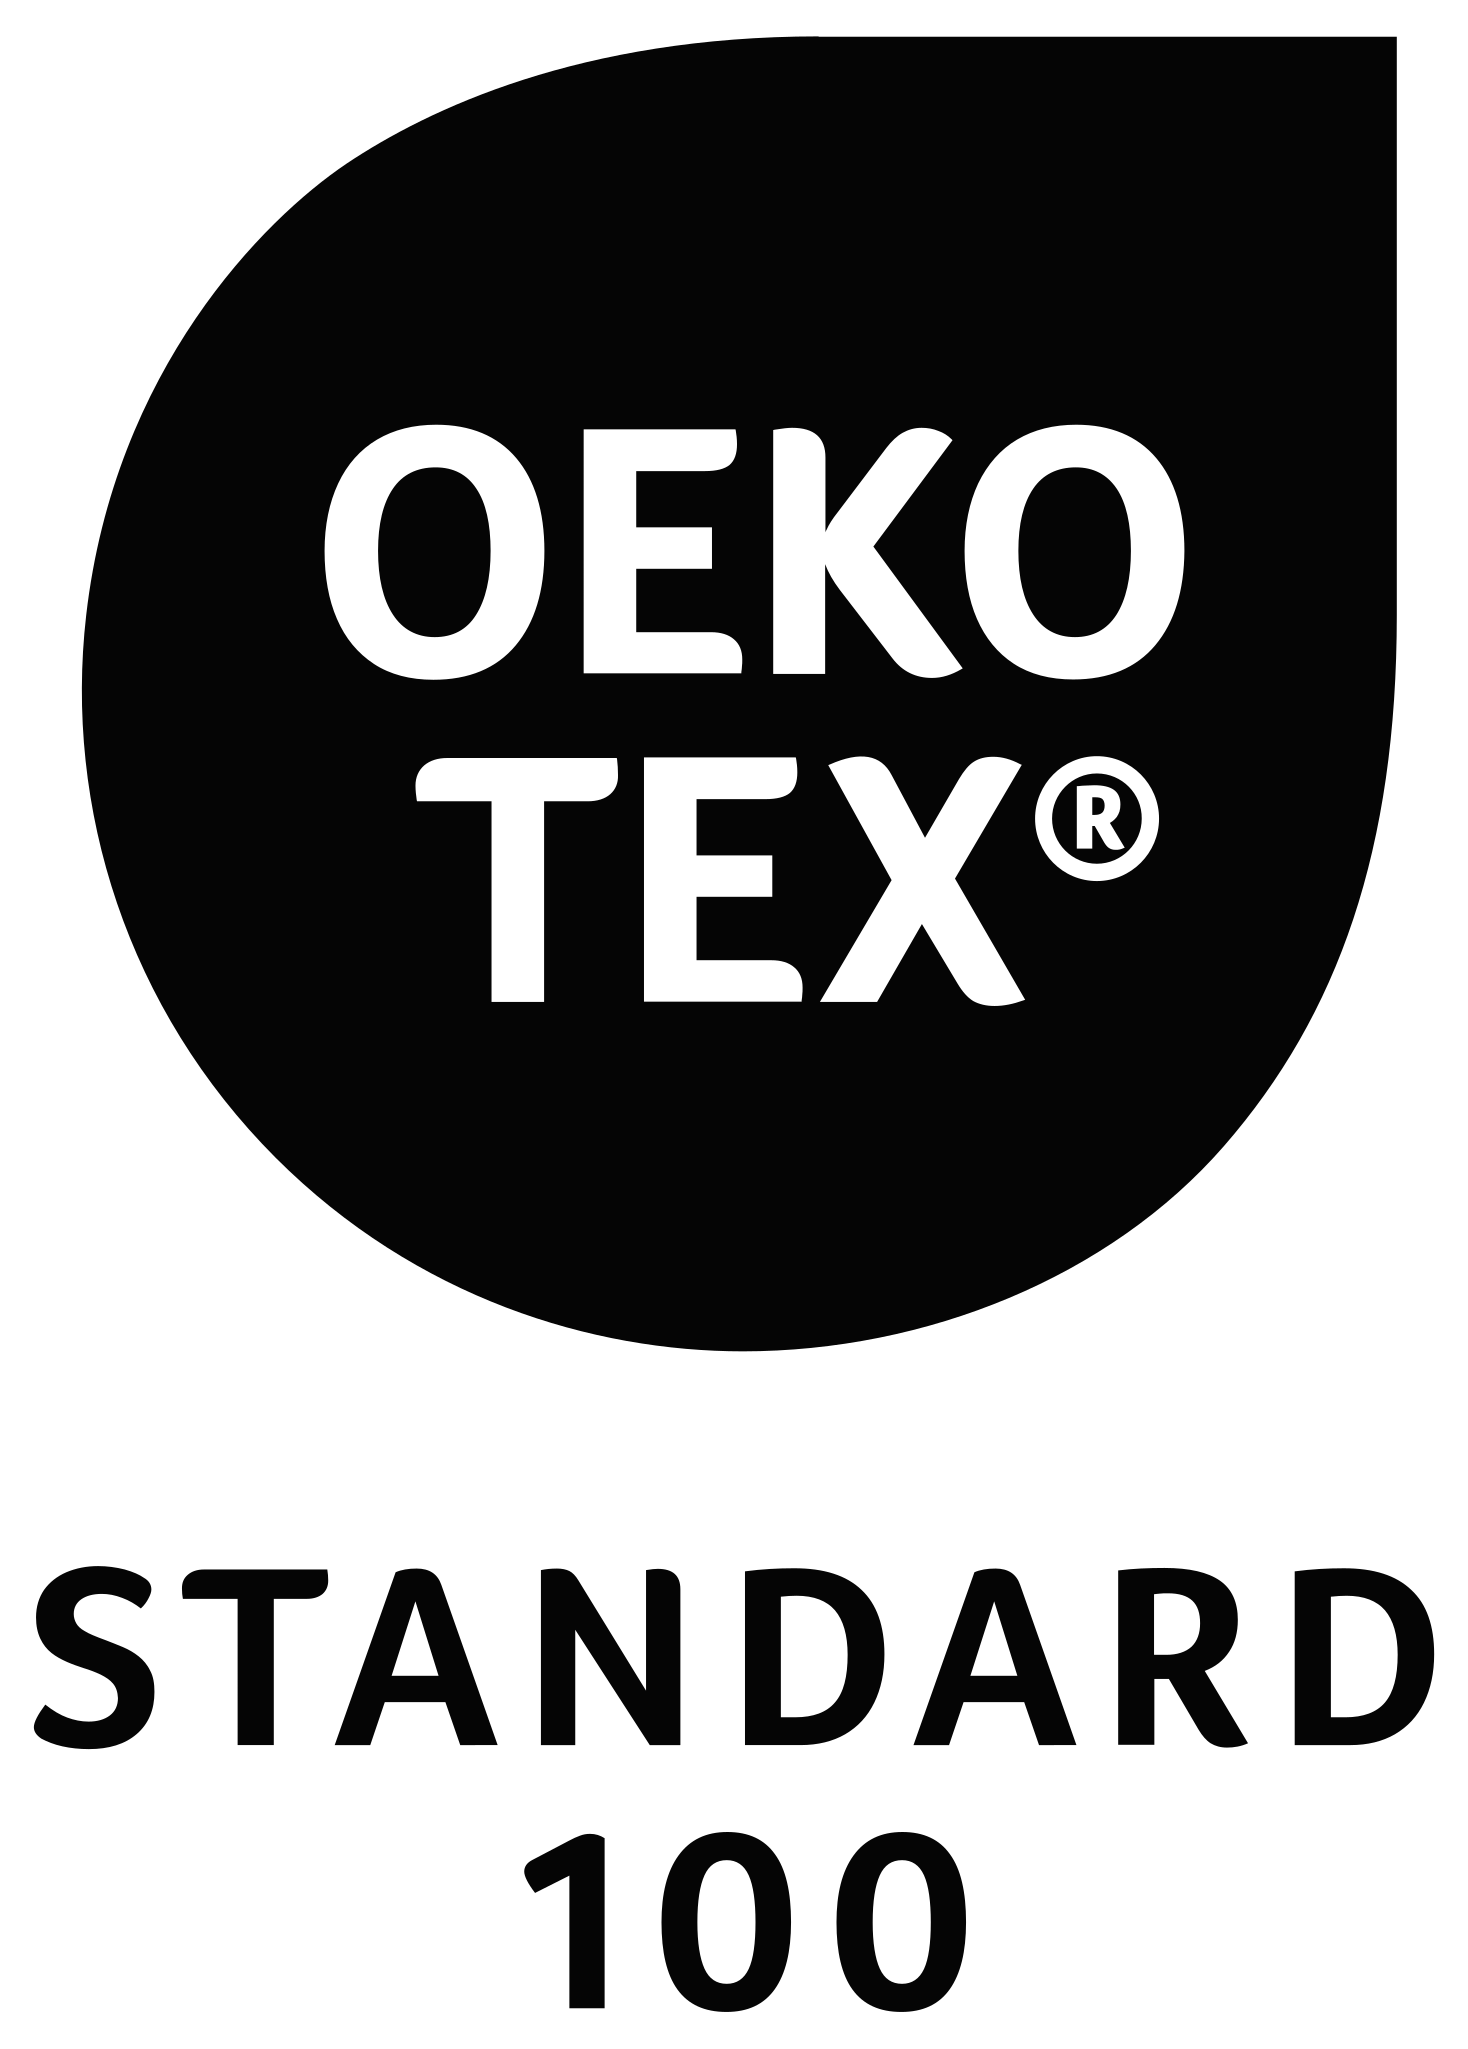 A brief introduction to Oeko-tex